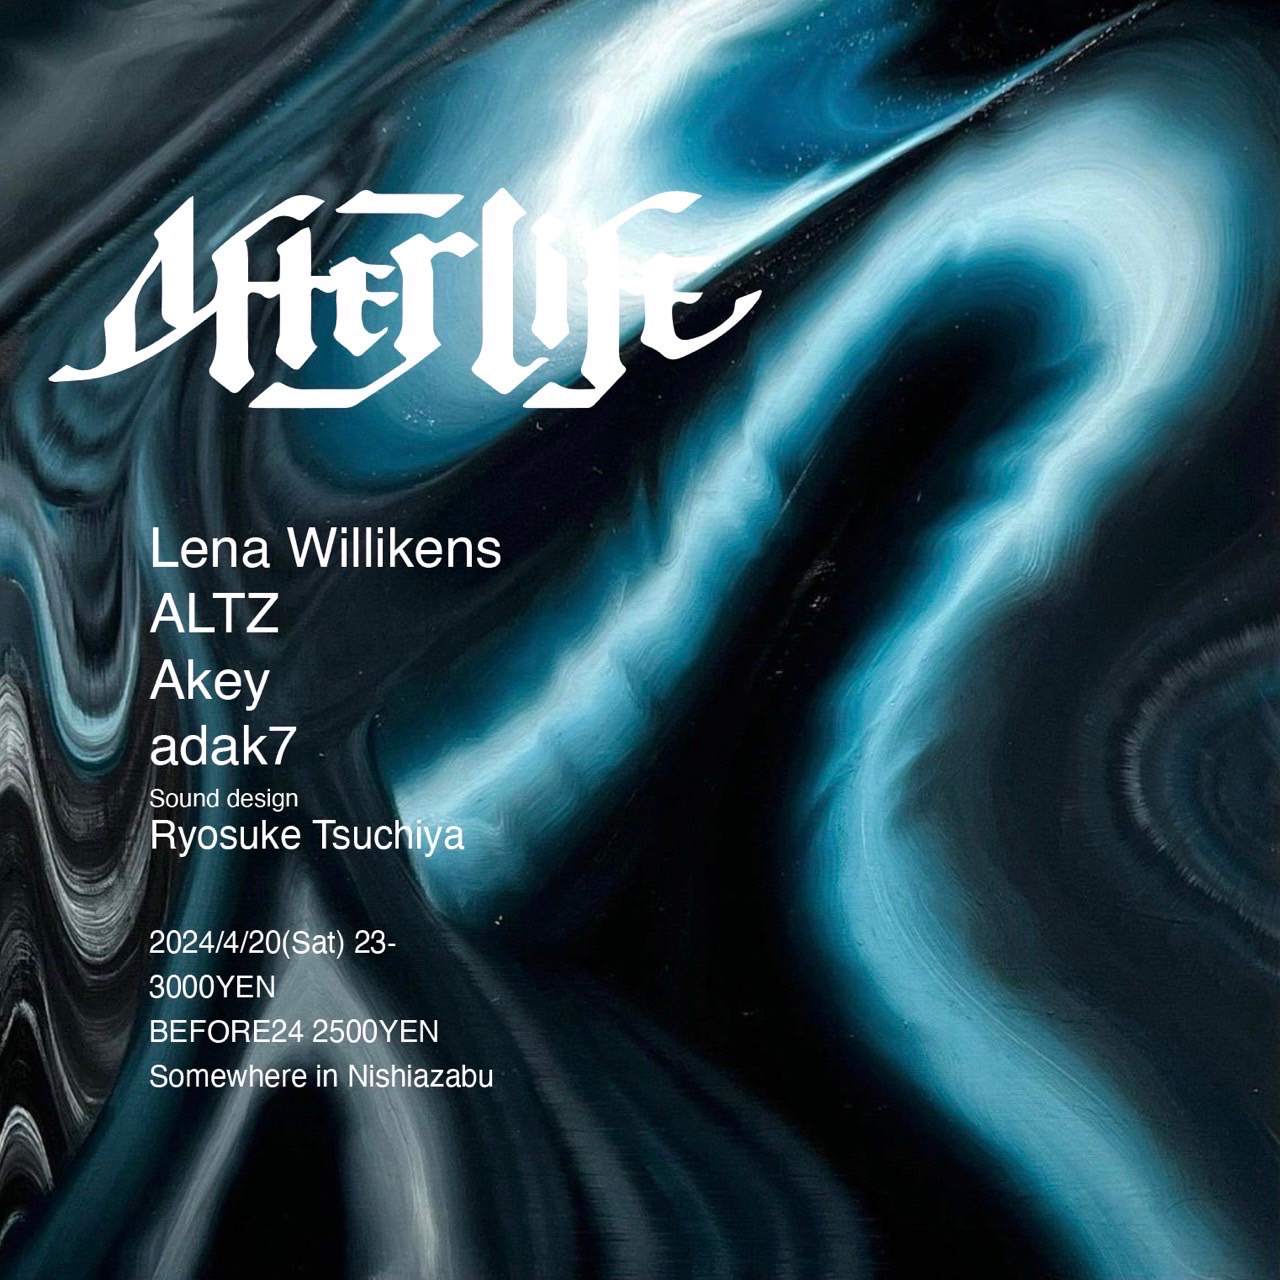 AFTERLIFE feat.Lena Willikens - フライヤー表